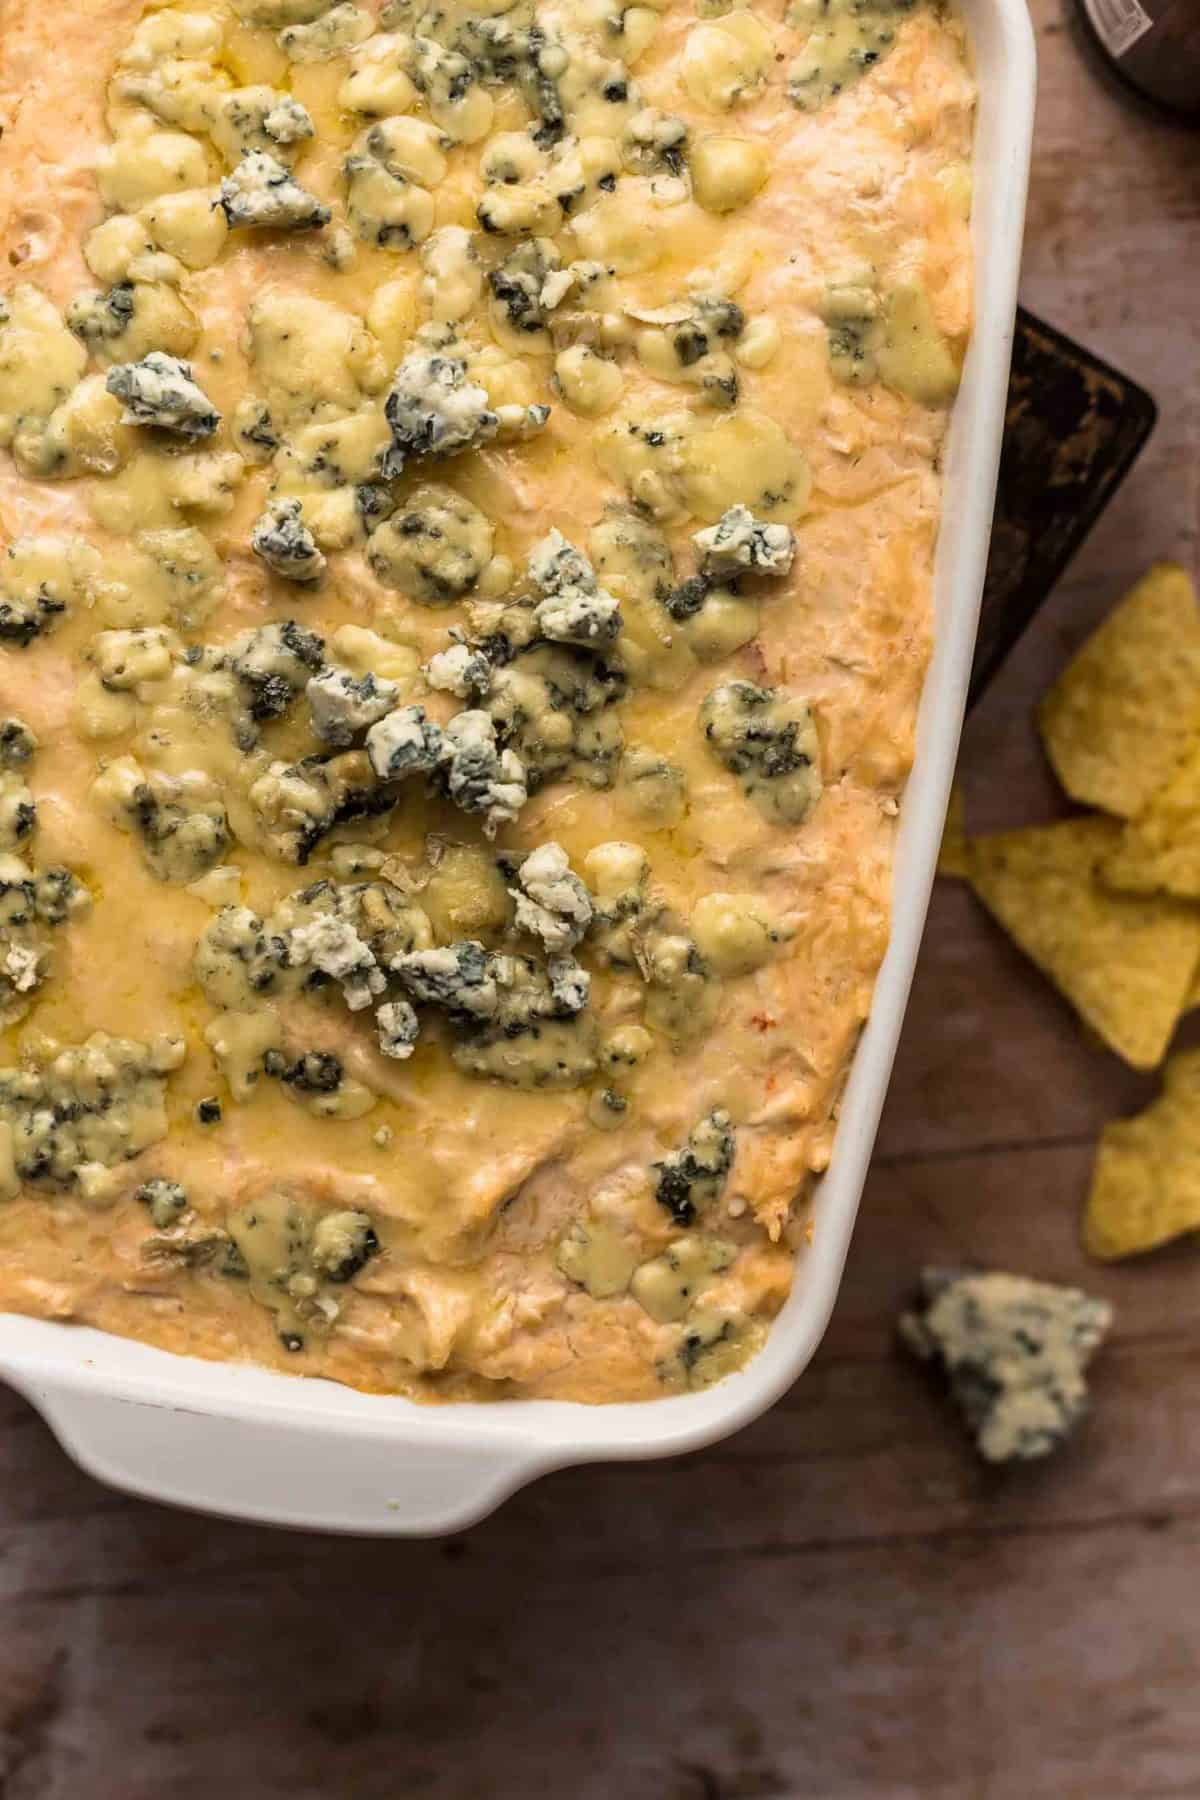 Buffalo chicken dip topped with blue cheese.